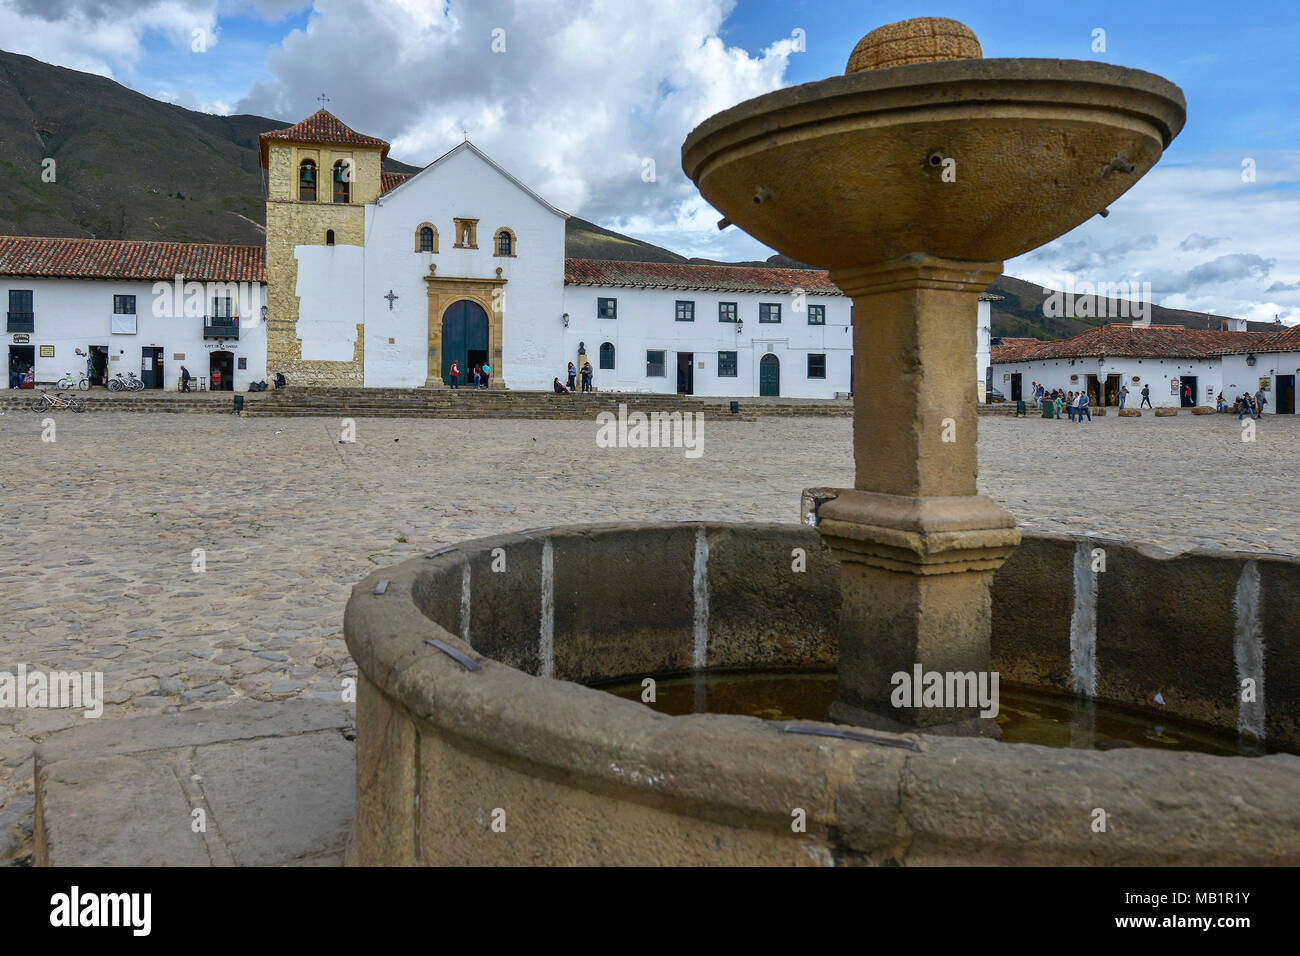 Villa De Leyva, Colombia - August 12, 2017: People in the Plaza Mayor, largest public square in Colombia in colonial town of Villa de Leyva, Colombia. Stock Photo